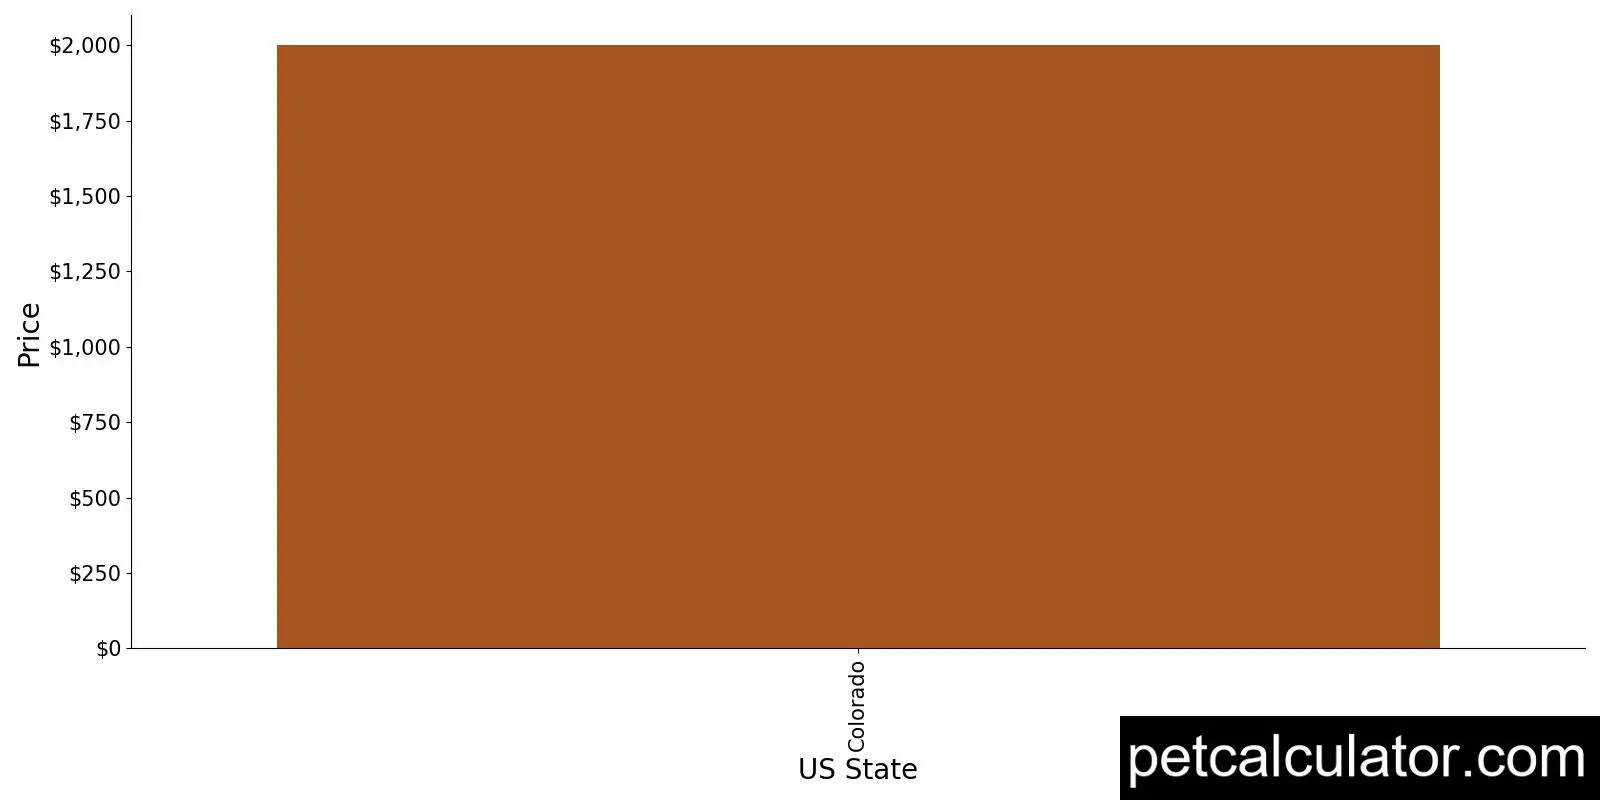 Price of Skye Terrier by US State 